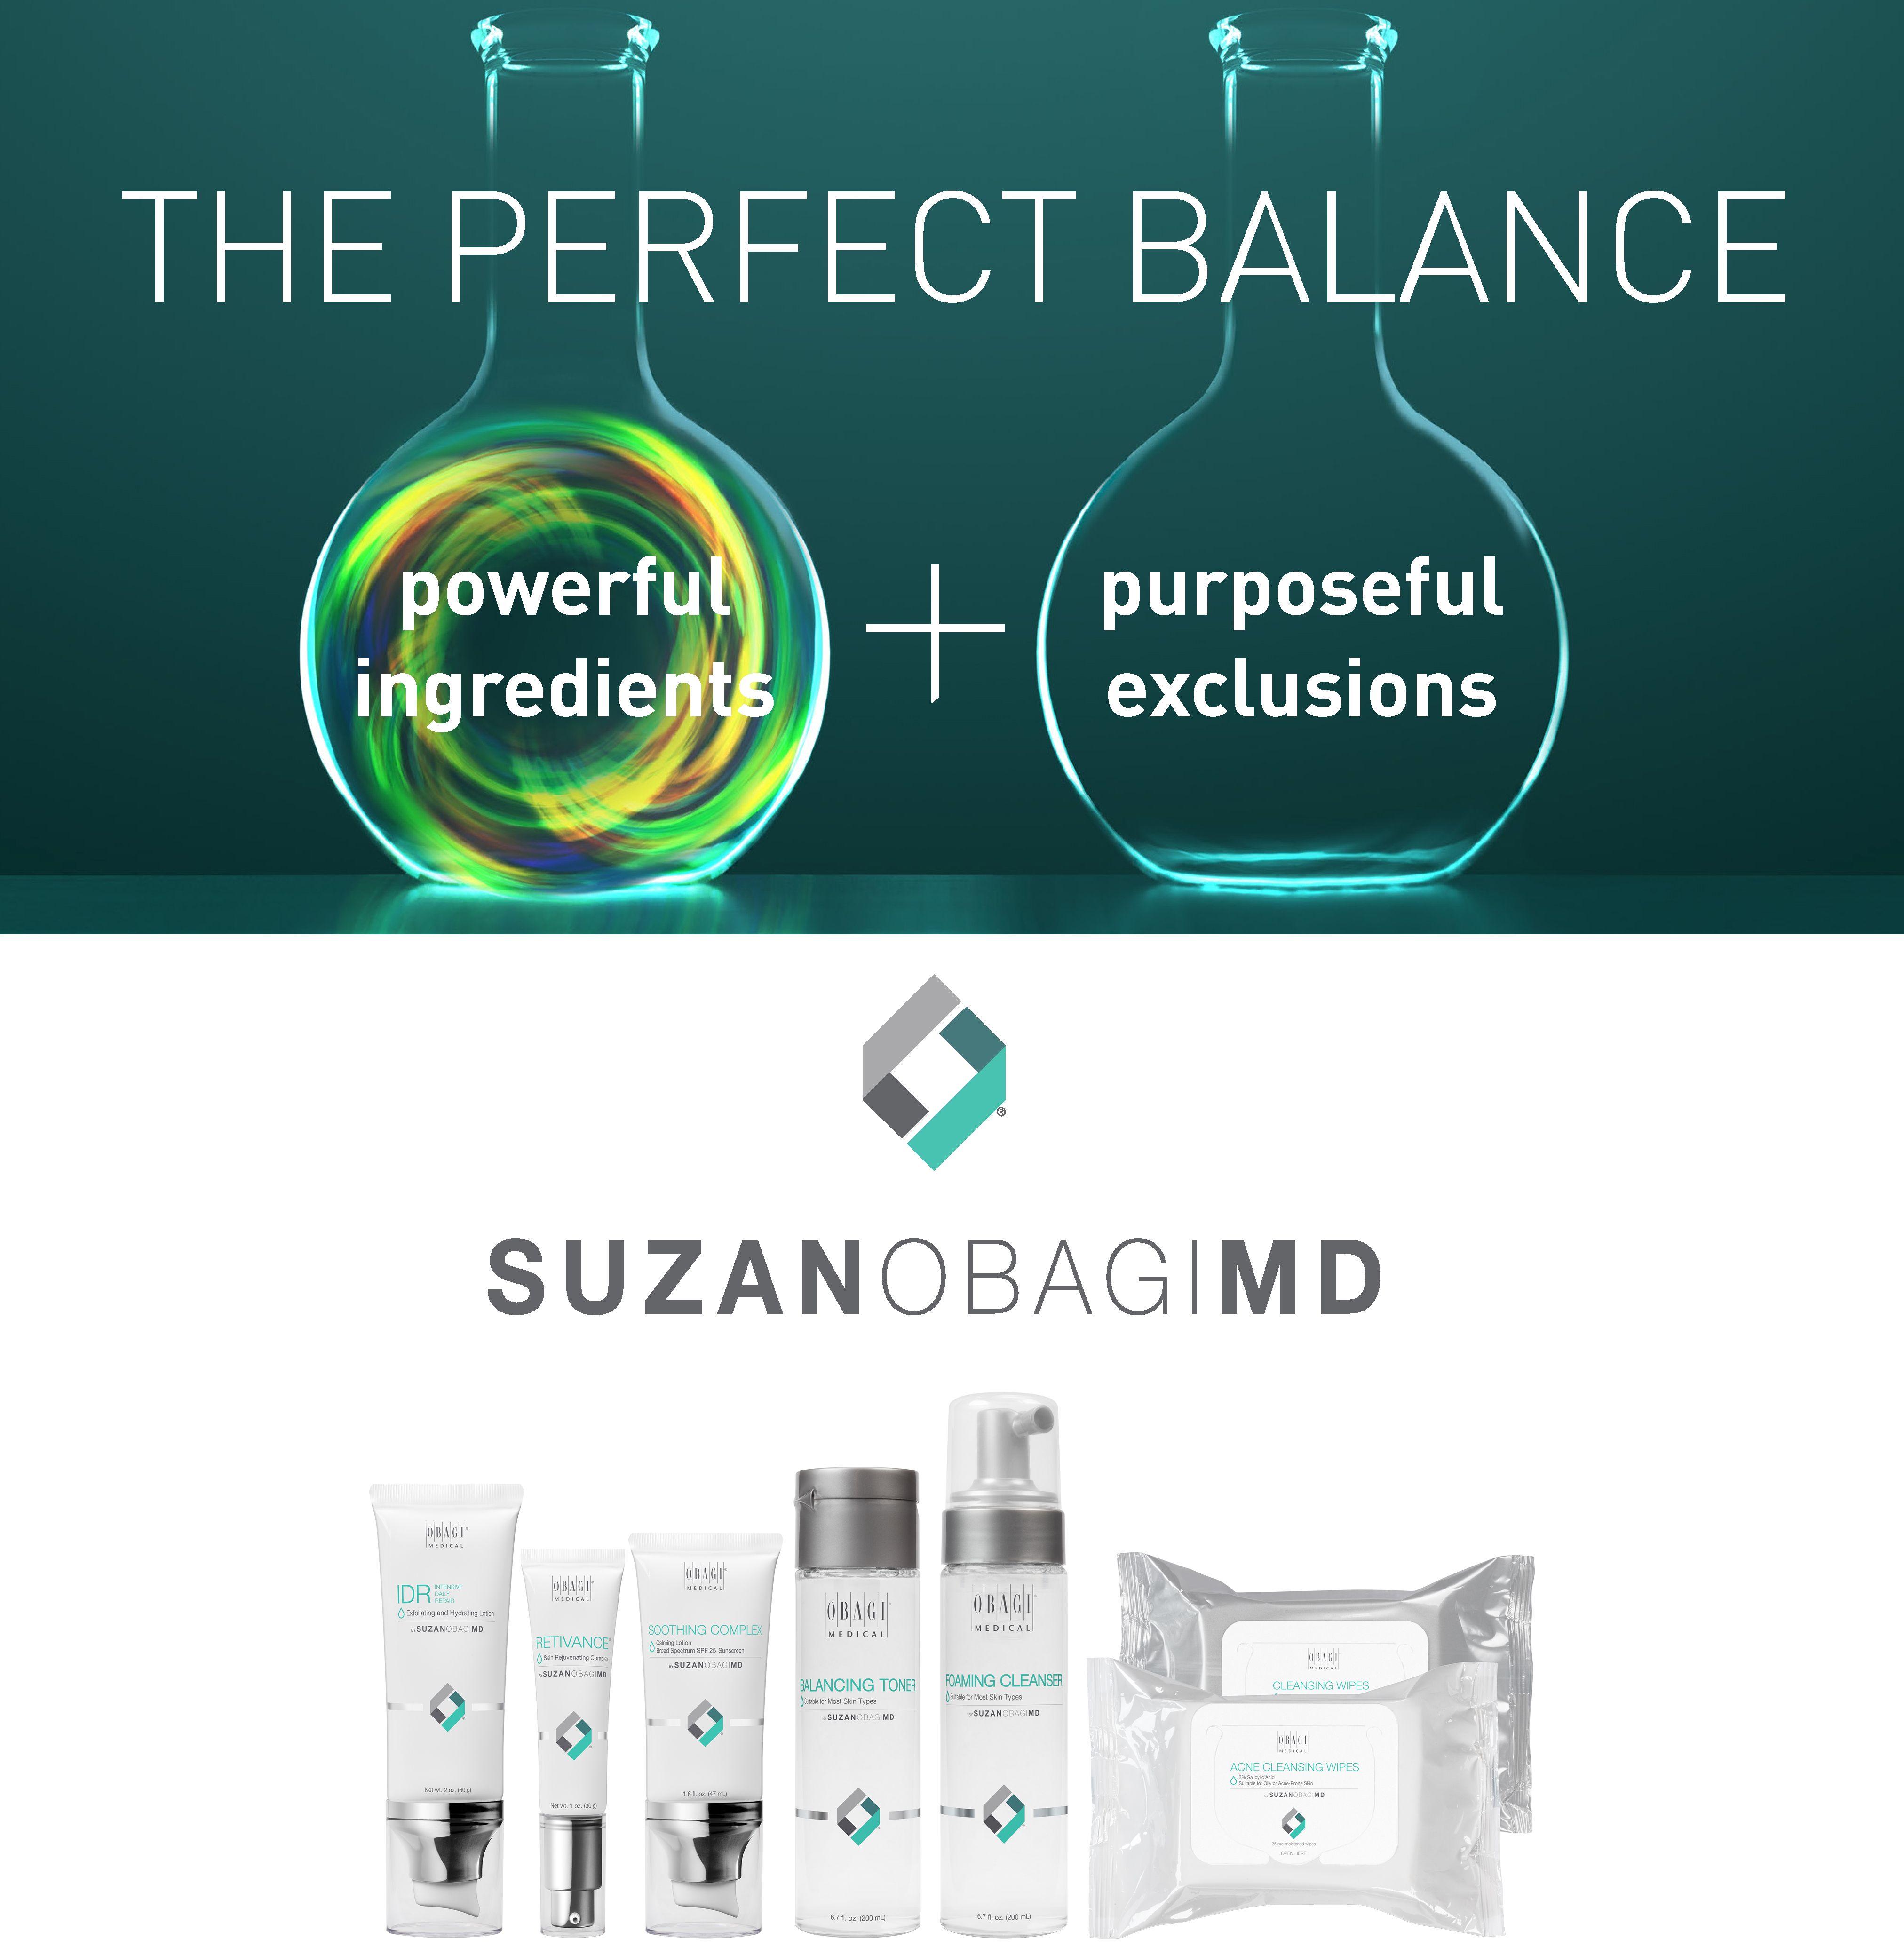 Obagi Logo - Product Preview: Next Generation Skin Care by Dr. Suzan Obagi ...